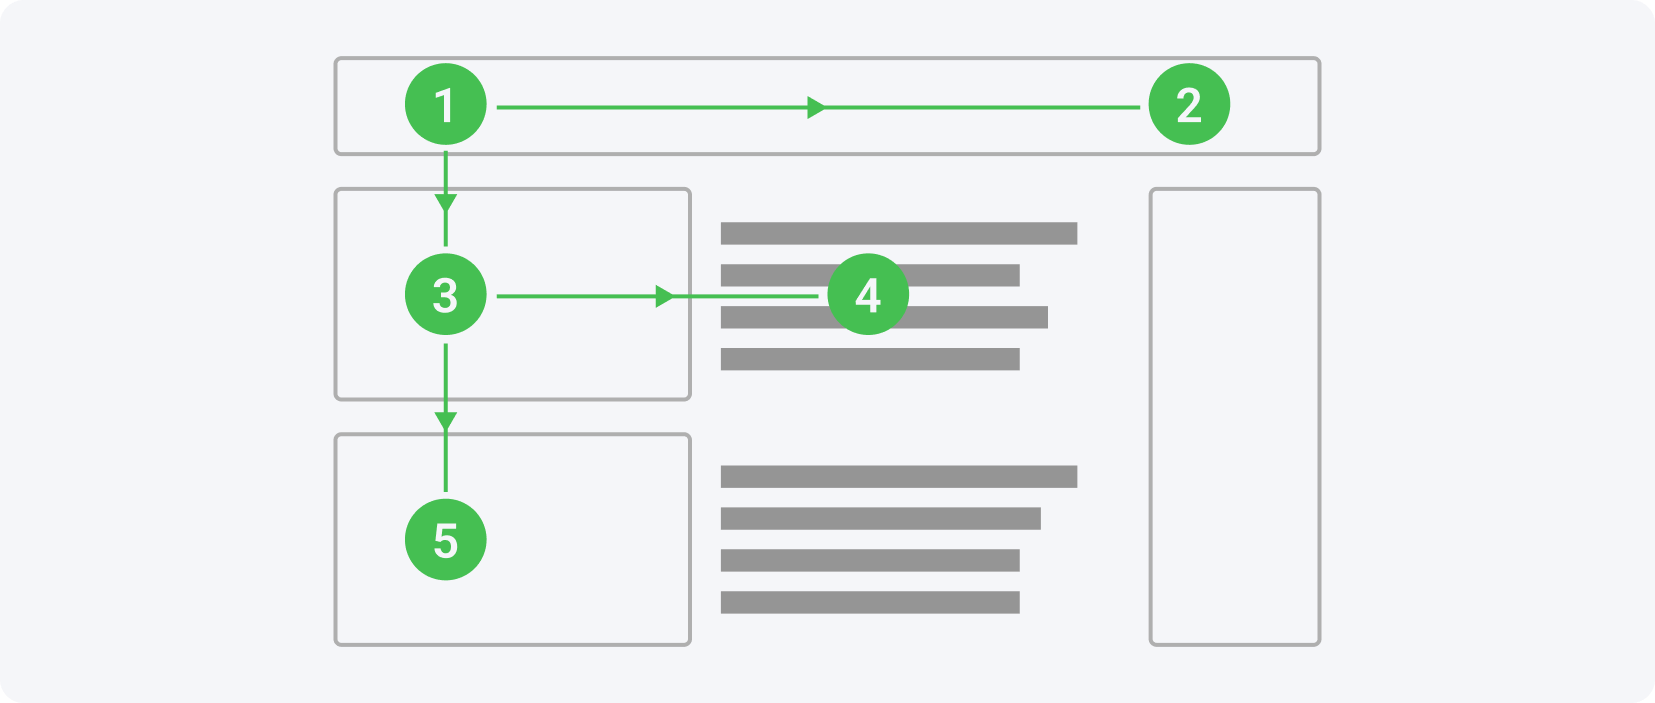 F model is often implemented when creating a landing page